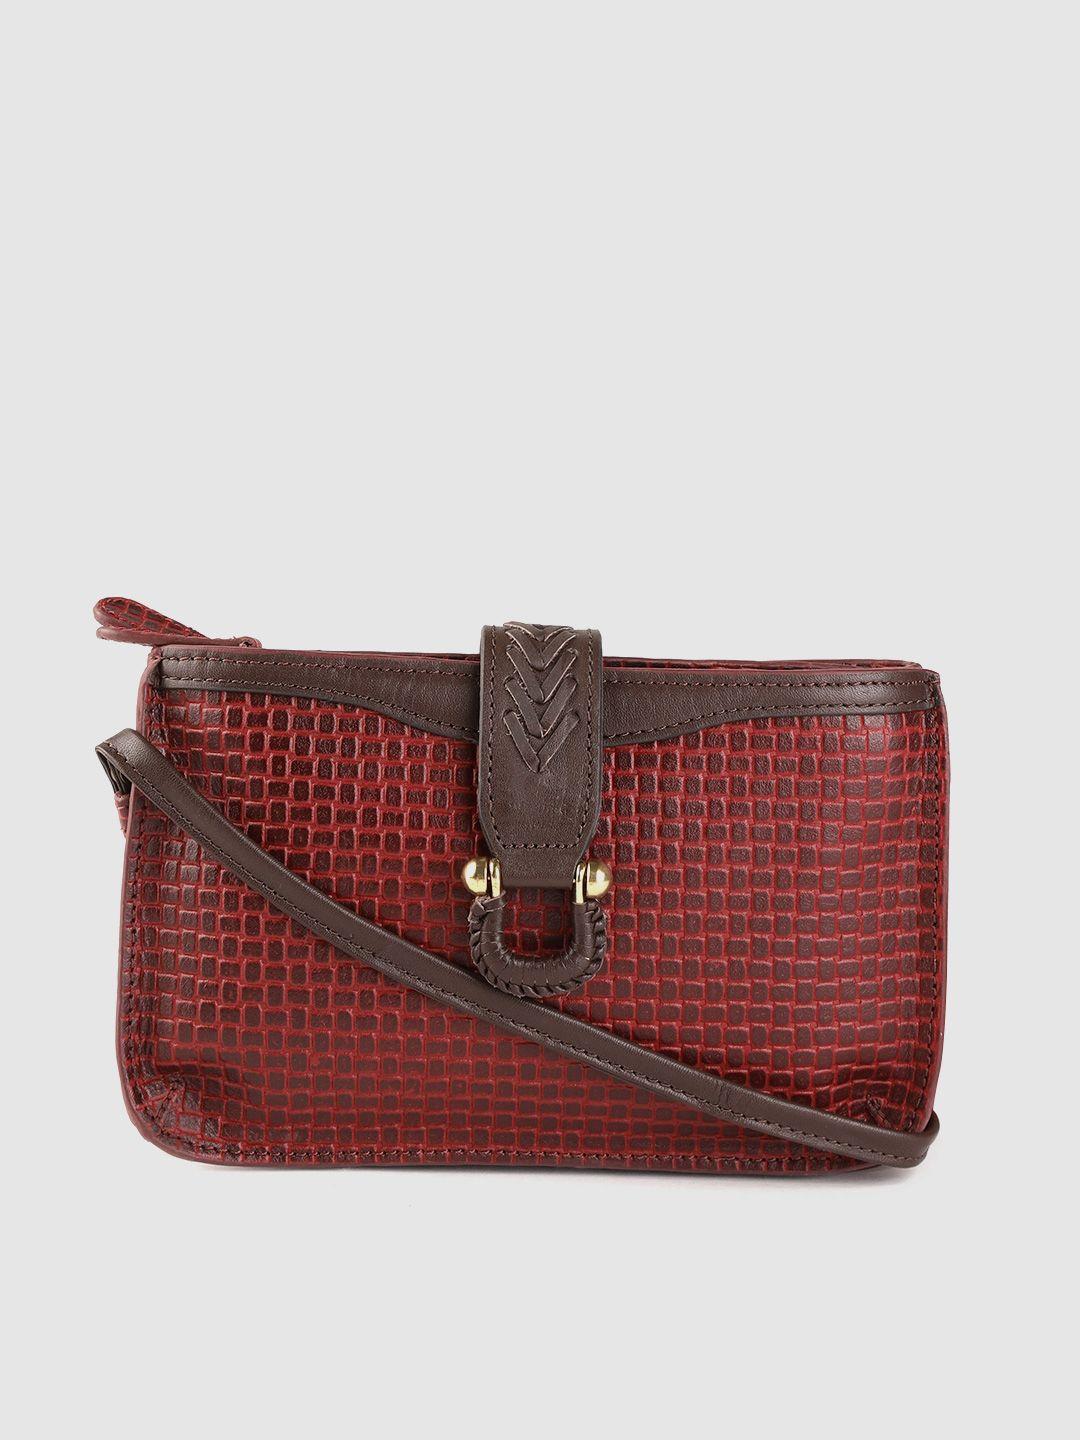 hidesign maroon textured leather handcrafted structured sling bag